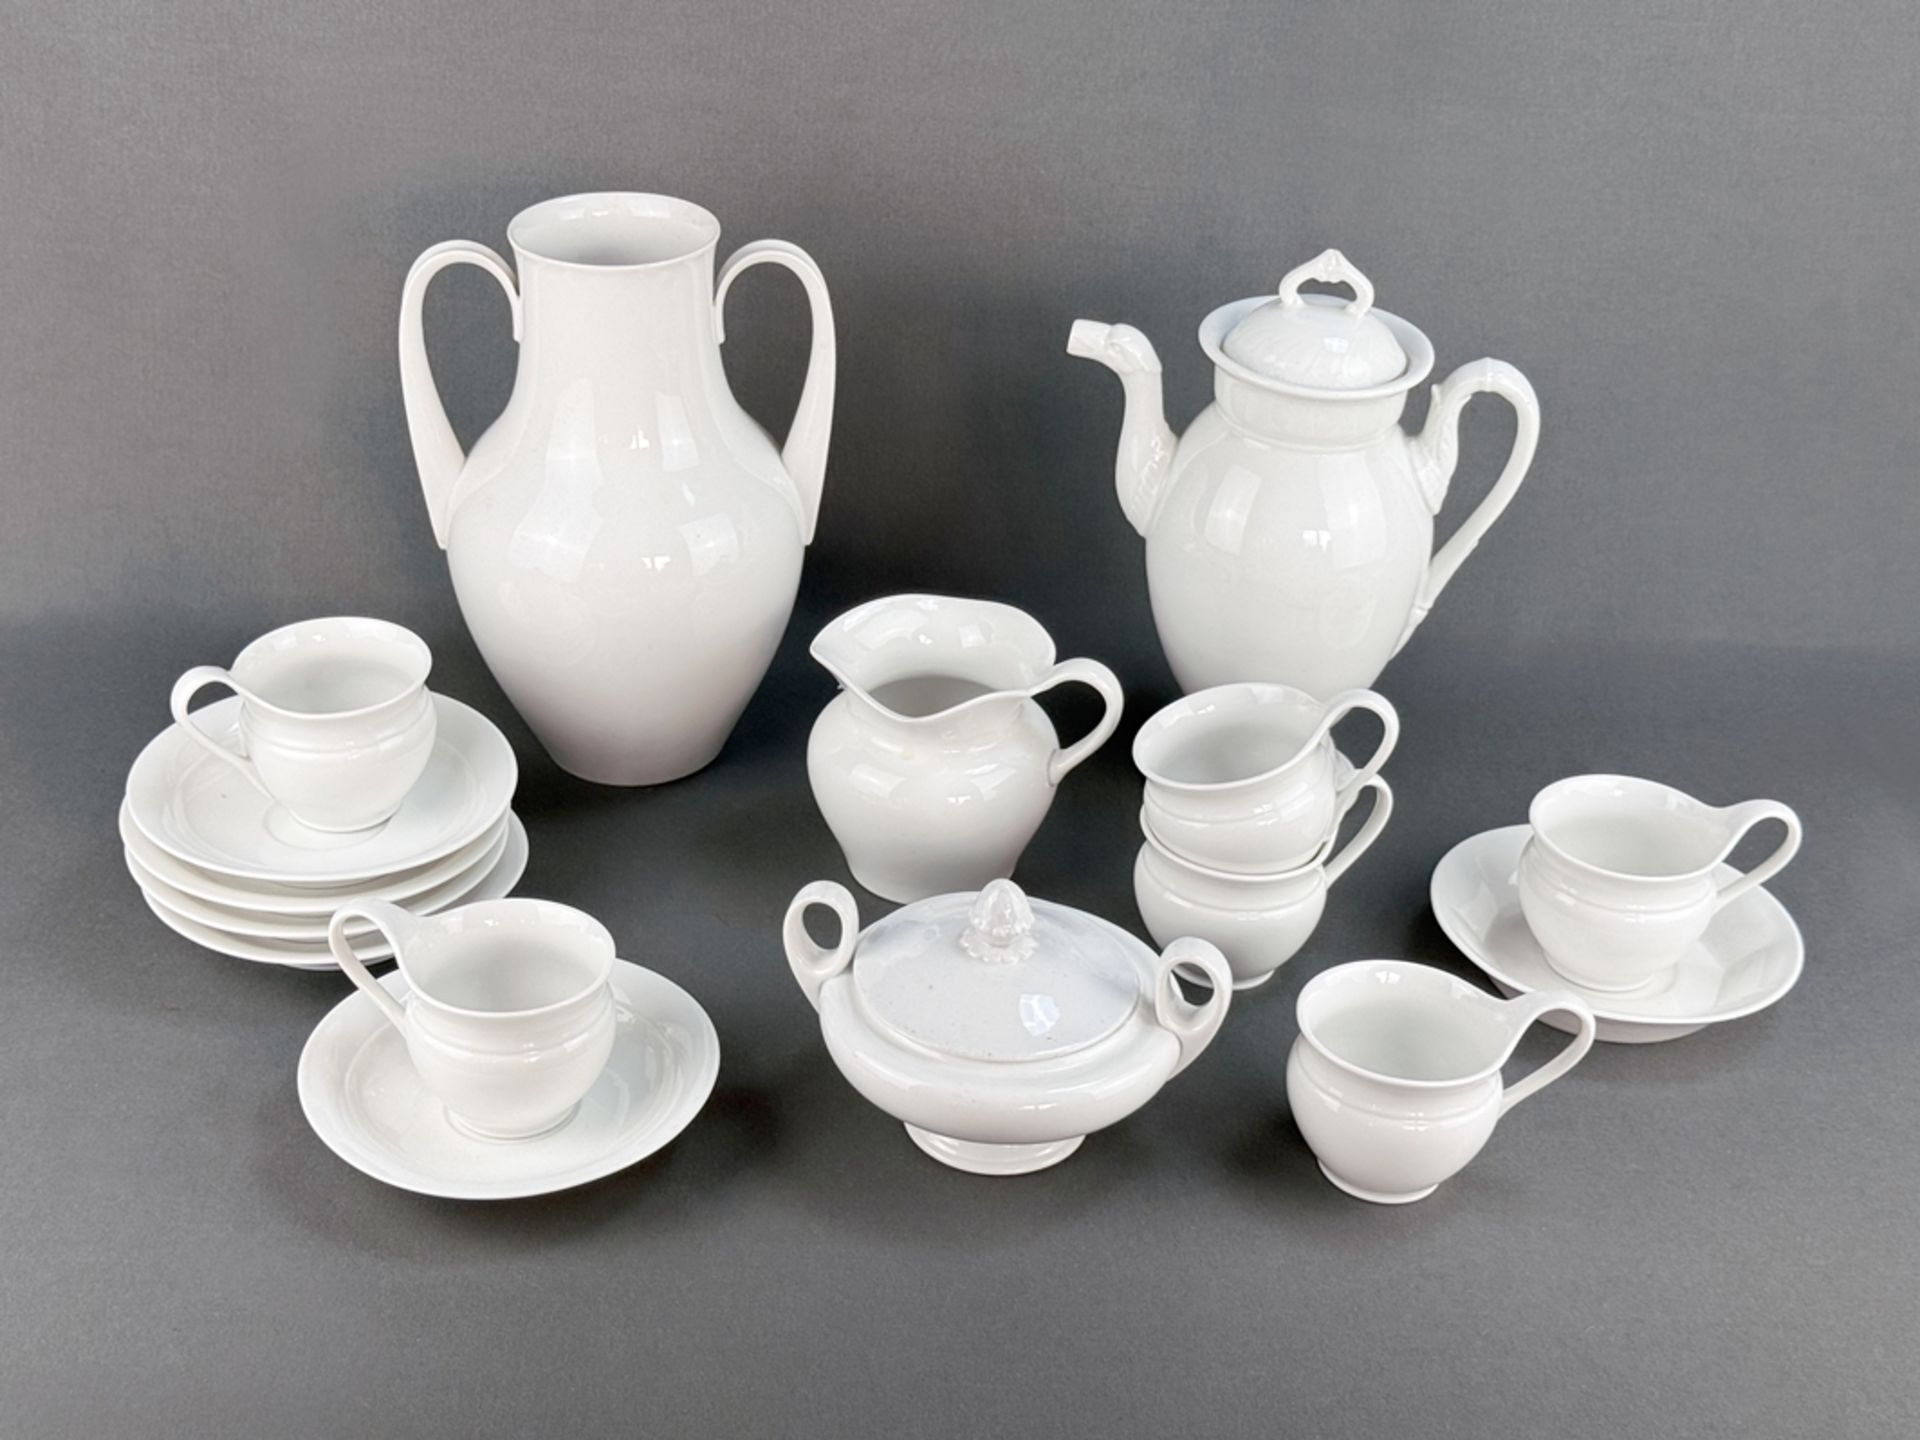 Porcelain pieces KPM Berlin, 15 pieces, white porcelain, various shapes and periods, consisting of: